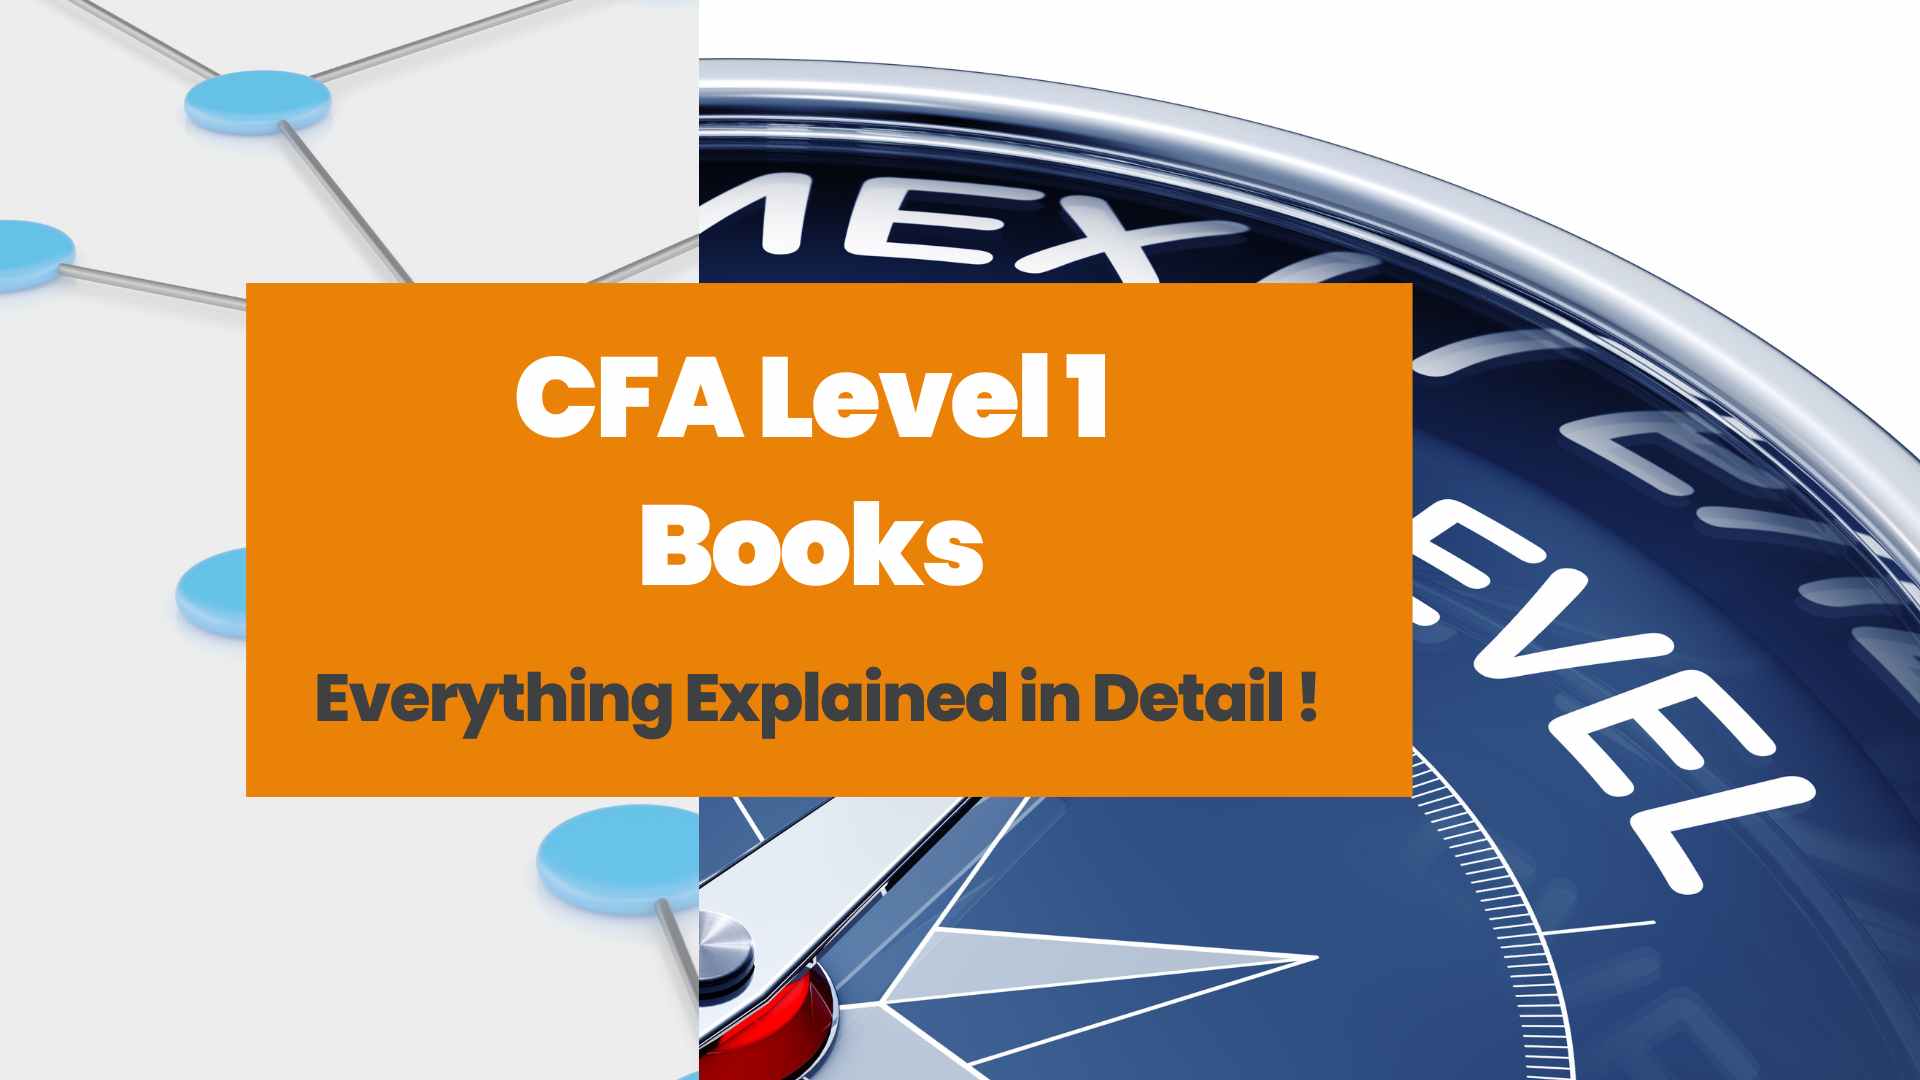 CFA level 1 books, Types, Exam structure & Tips for Exams